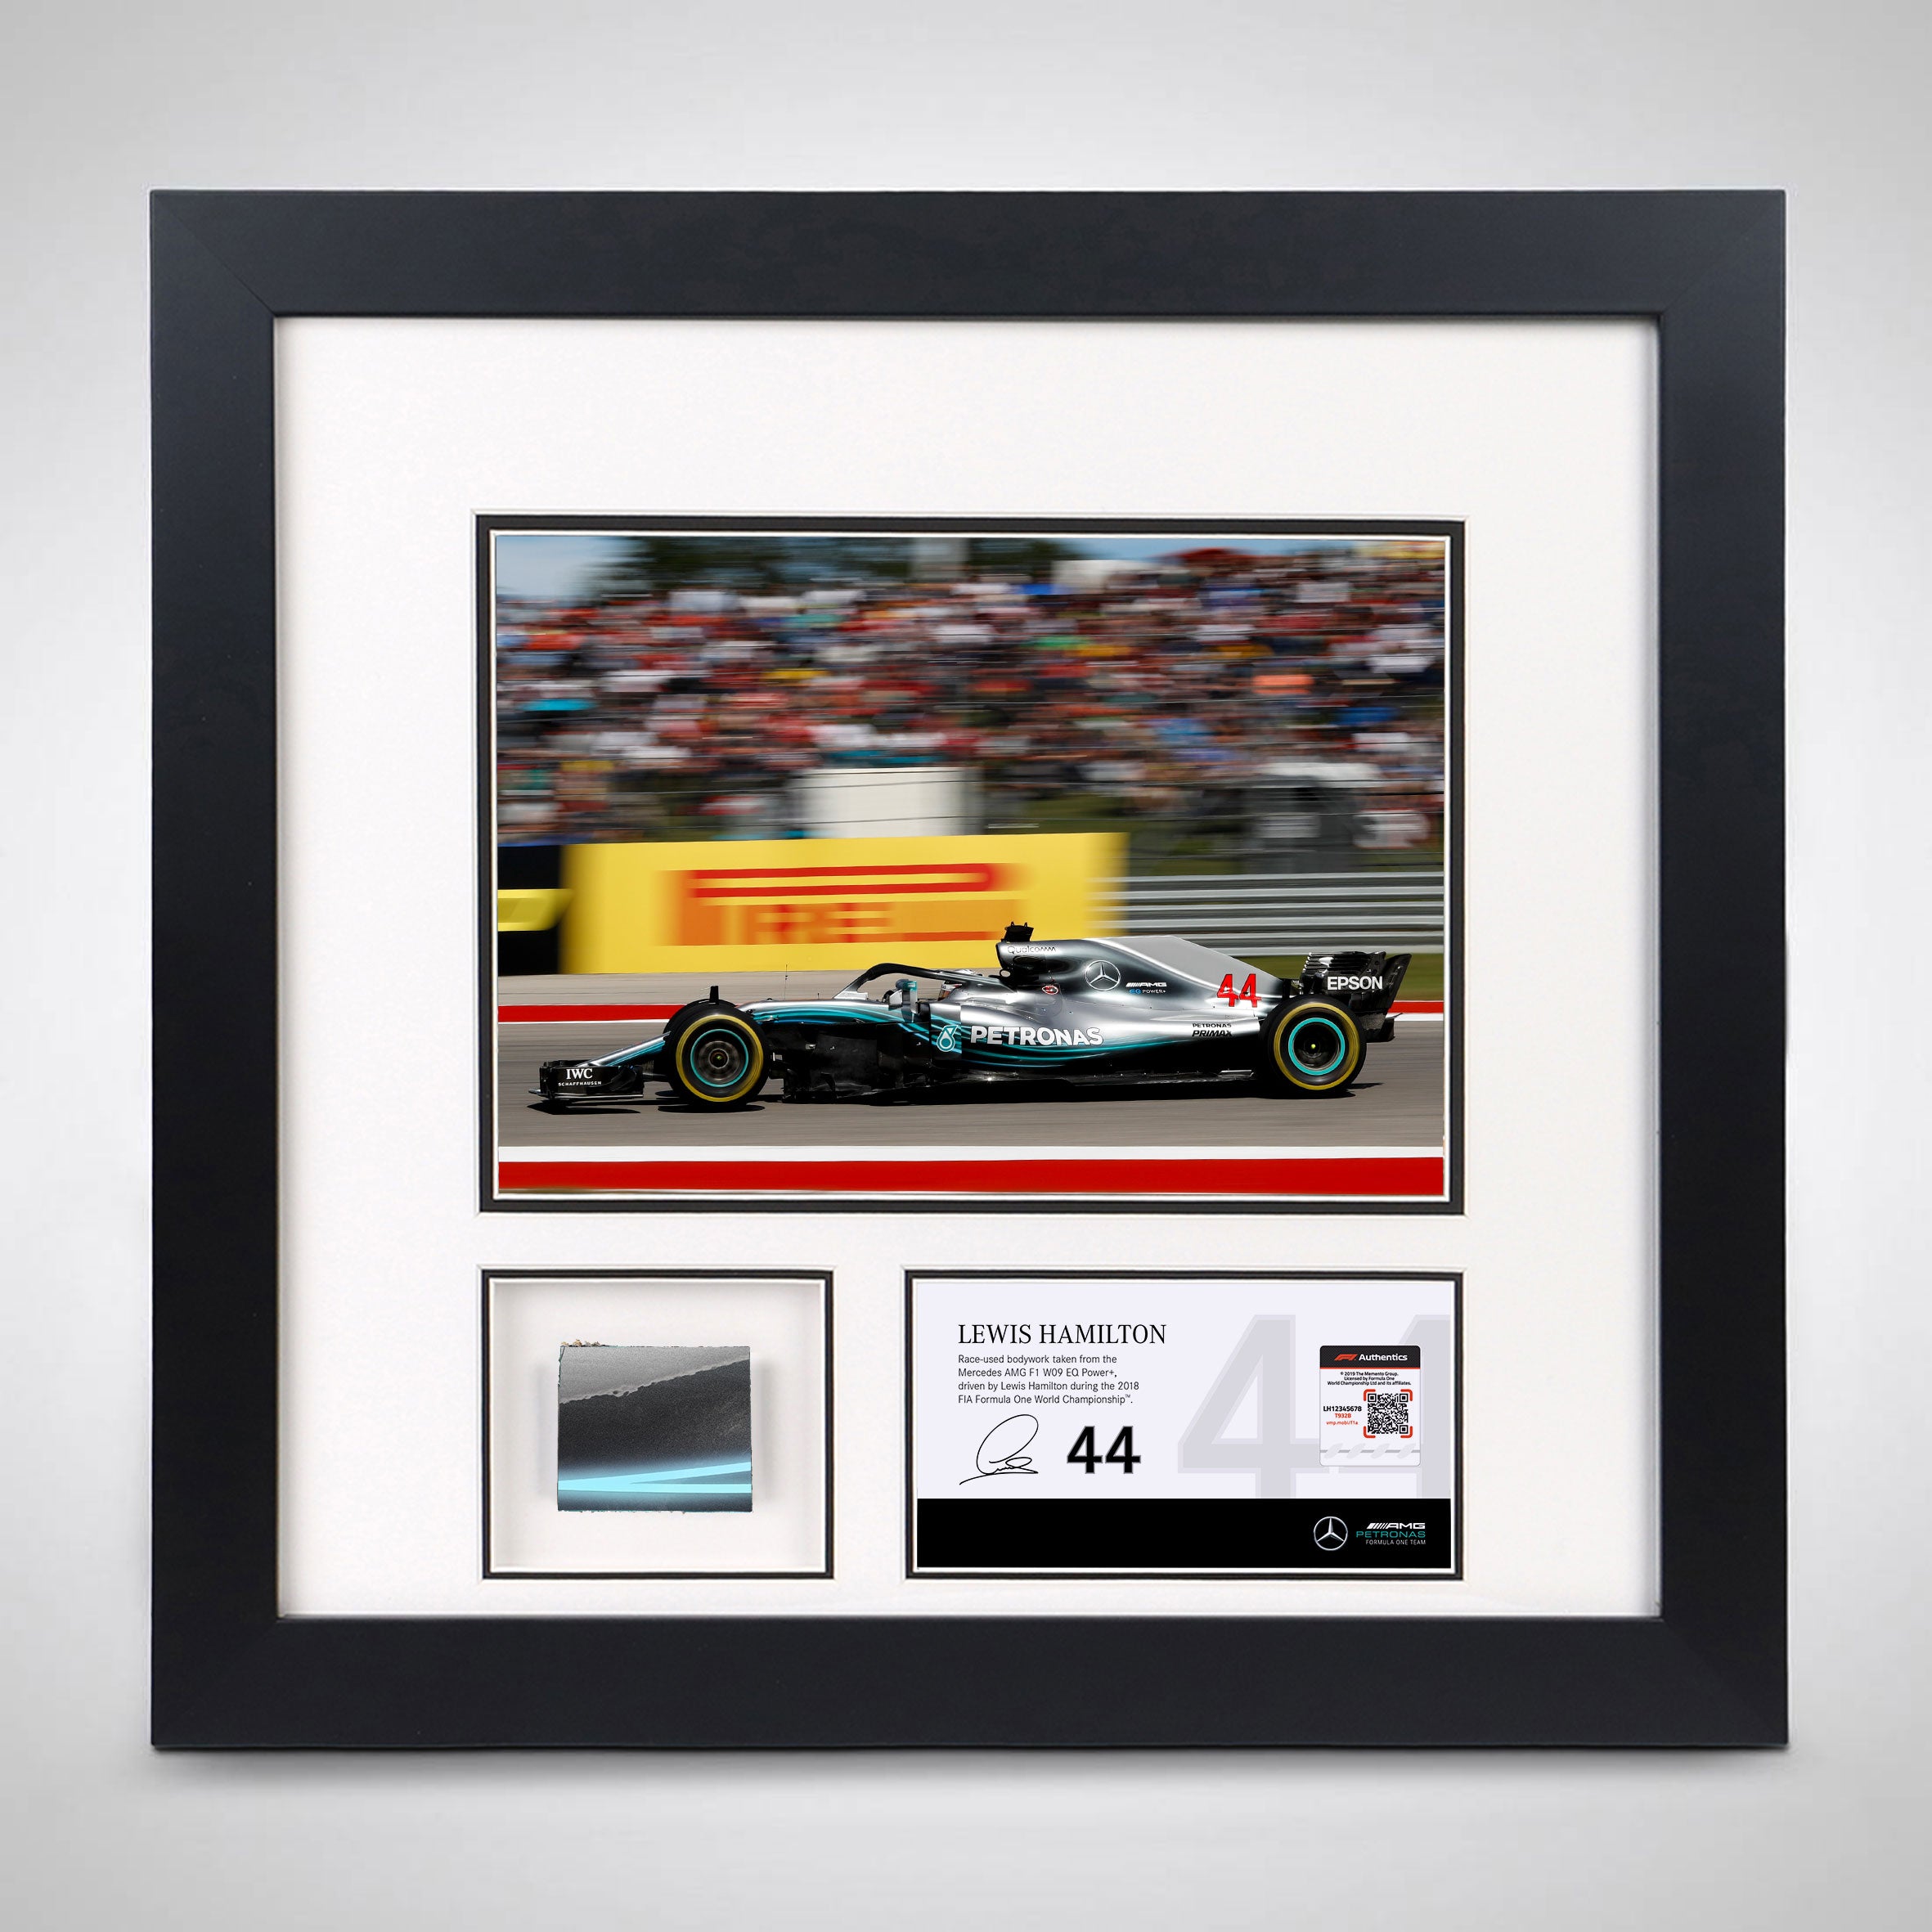 F1 Christmas presents: 8 great gift ideas